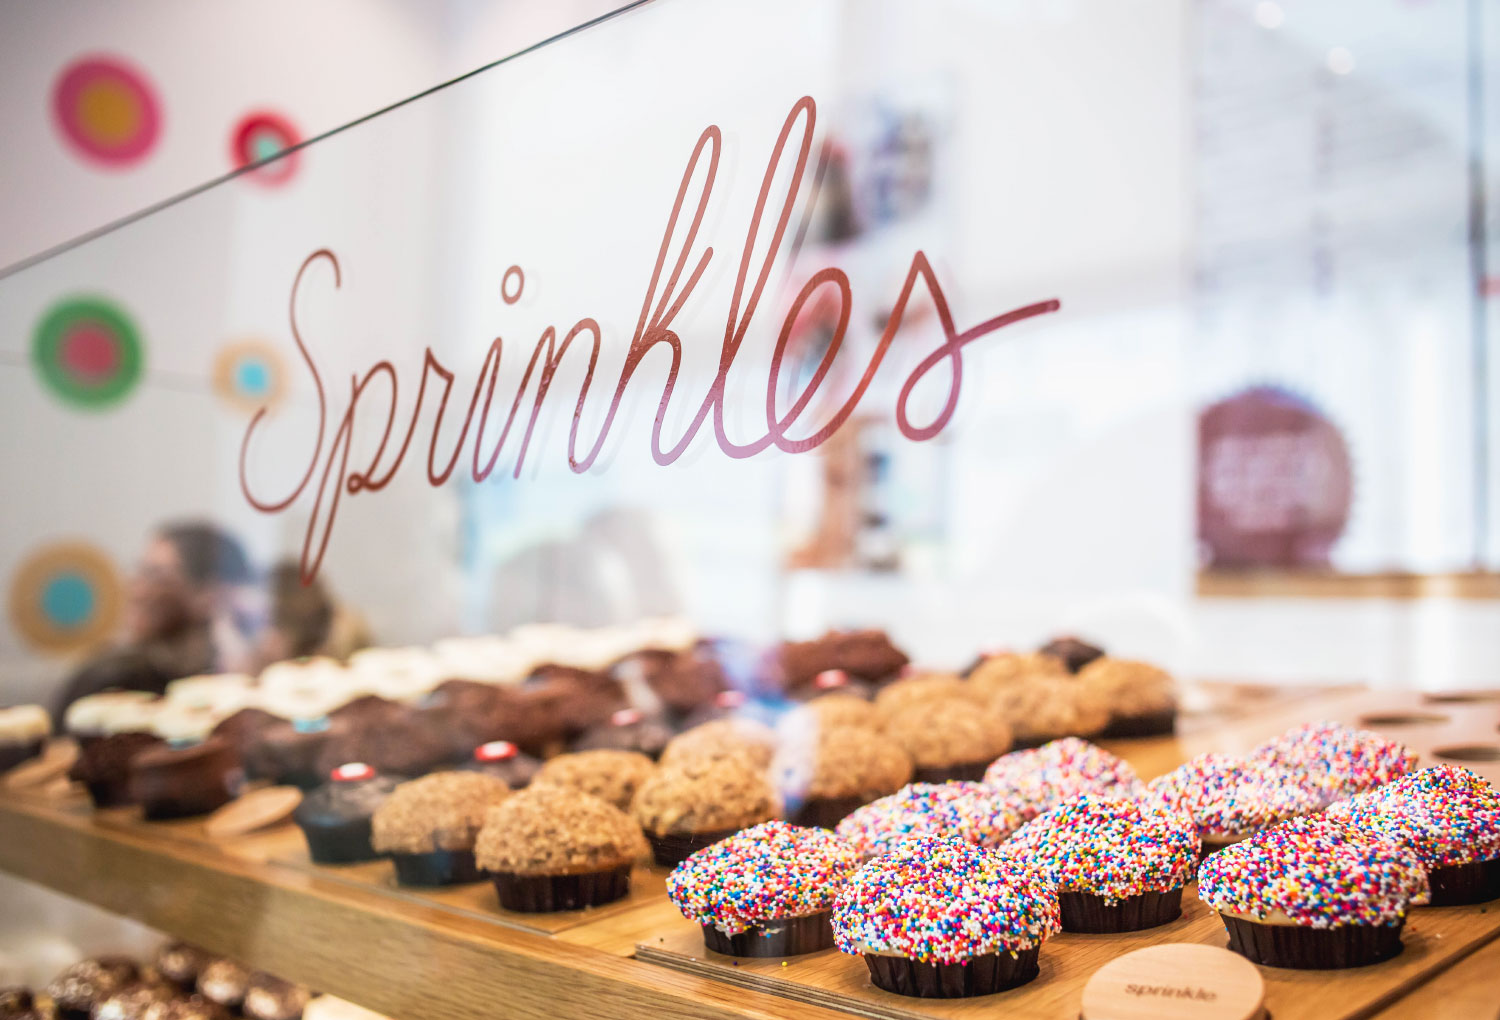 How To Store Sprinkles Cupcakes